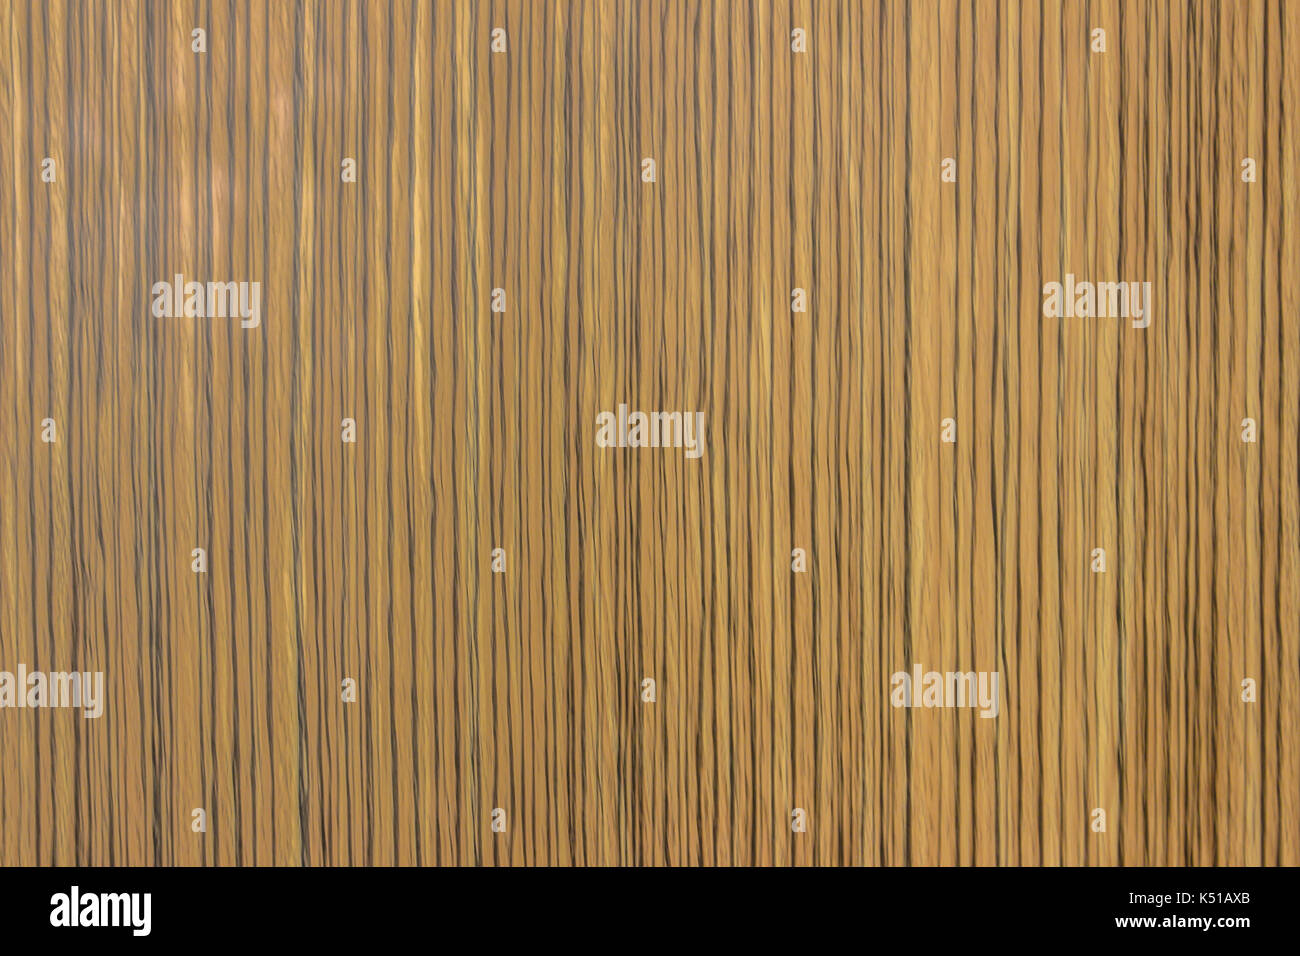 A wooden textured wainscot background Stock Photo